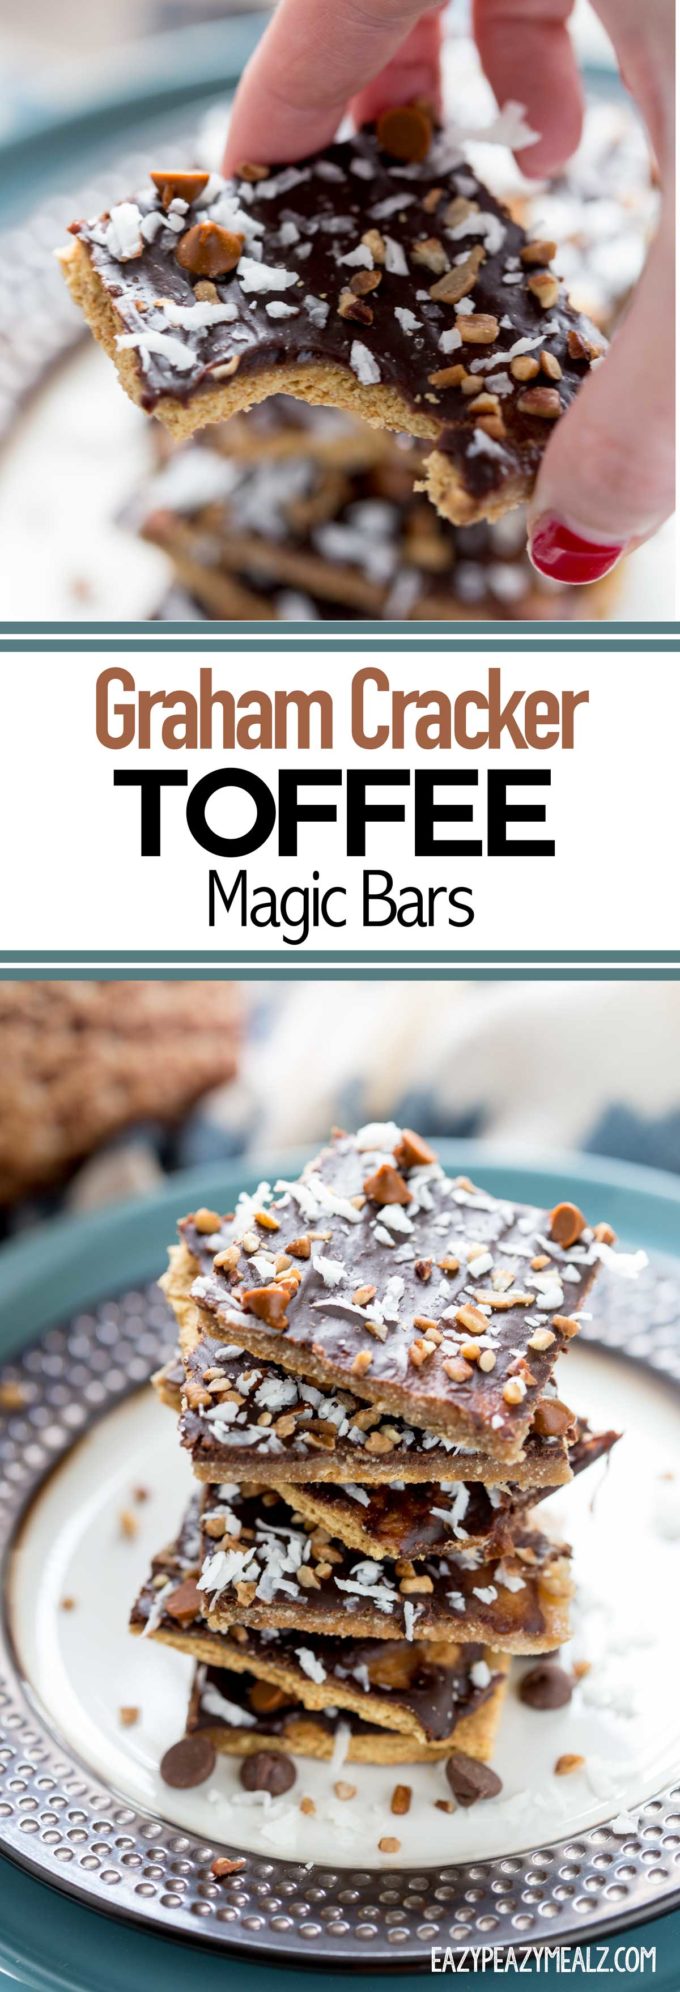 Graham Cracker Toffee Magic Bars are like the perfect mix between graham crackers, toffee, and magic bars. So easy to make and very delicious. 